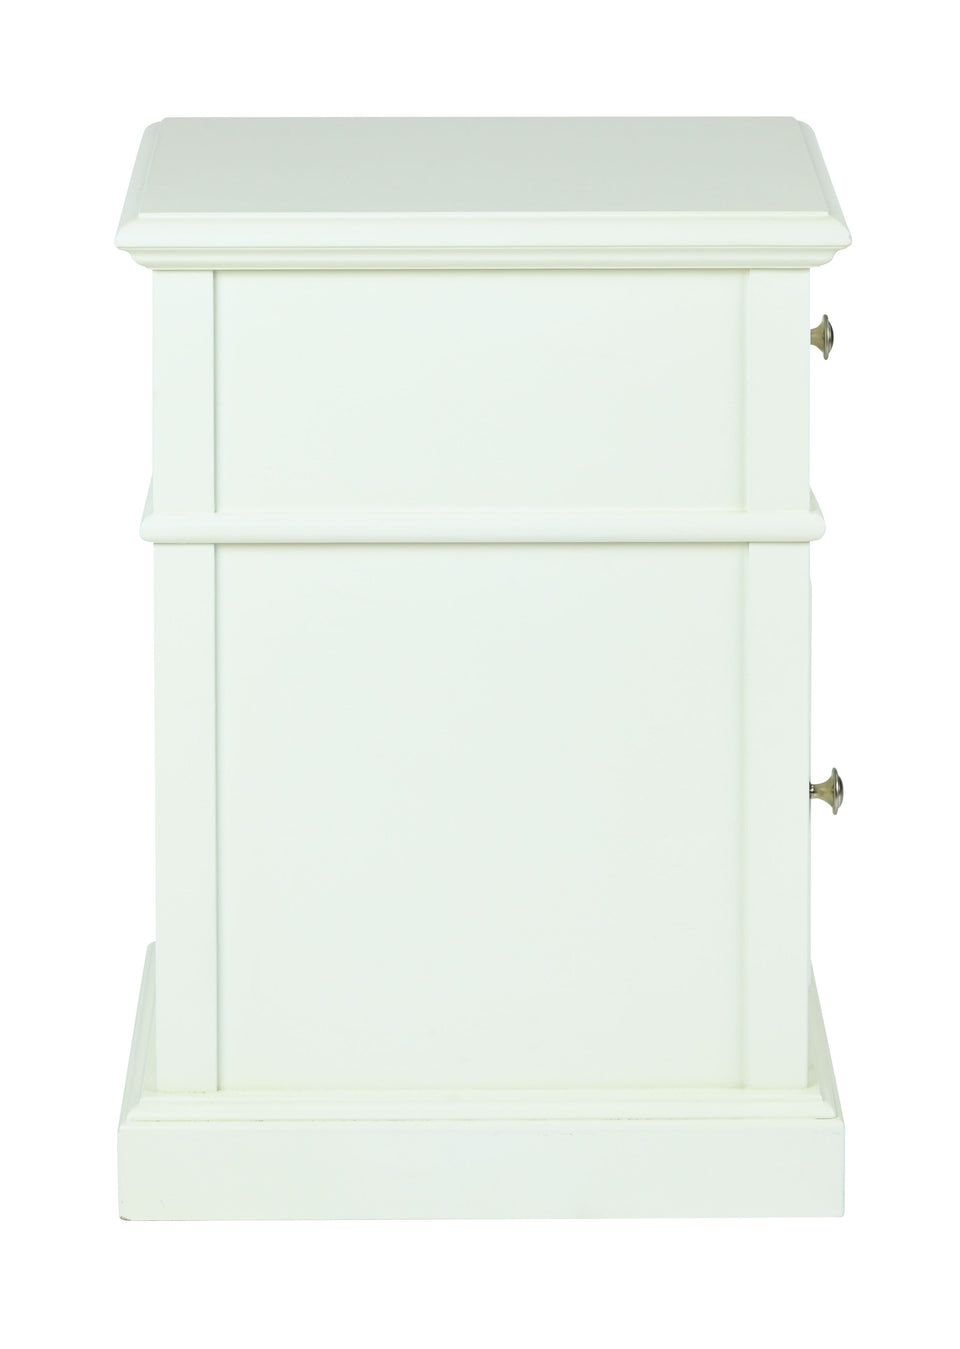 oxford white side table with single drawer and door with metal knob side view